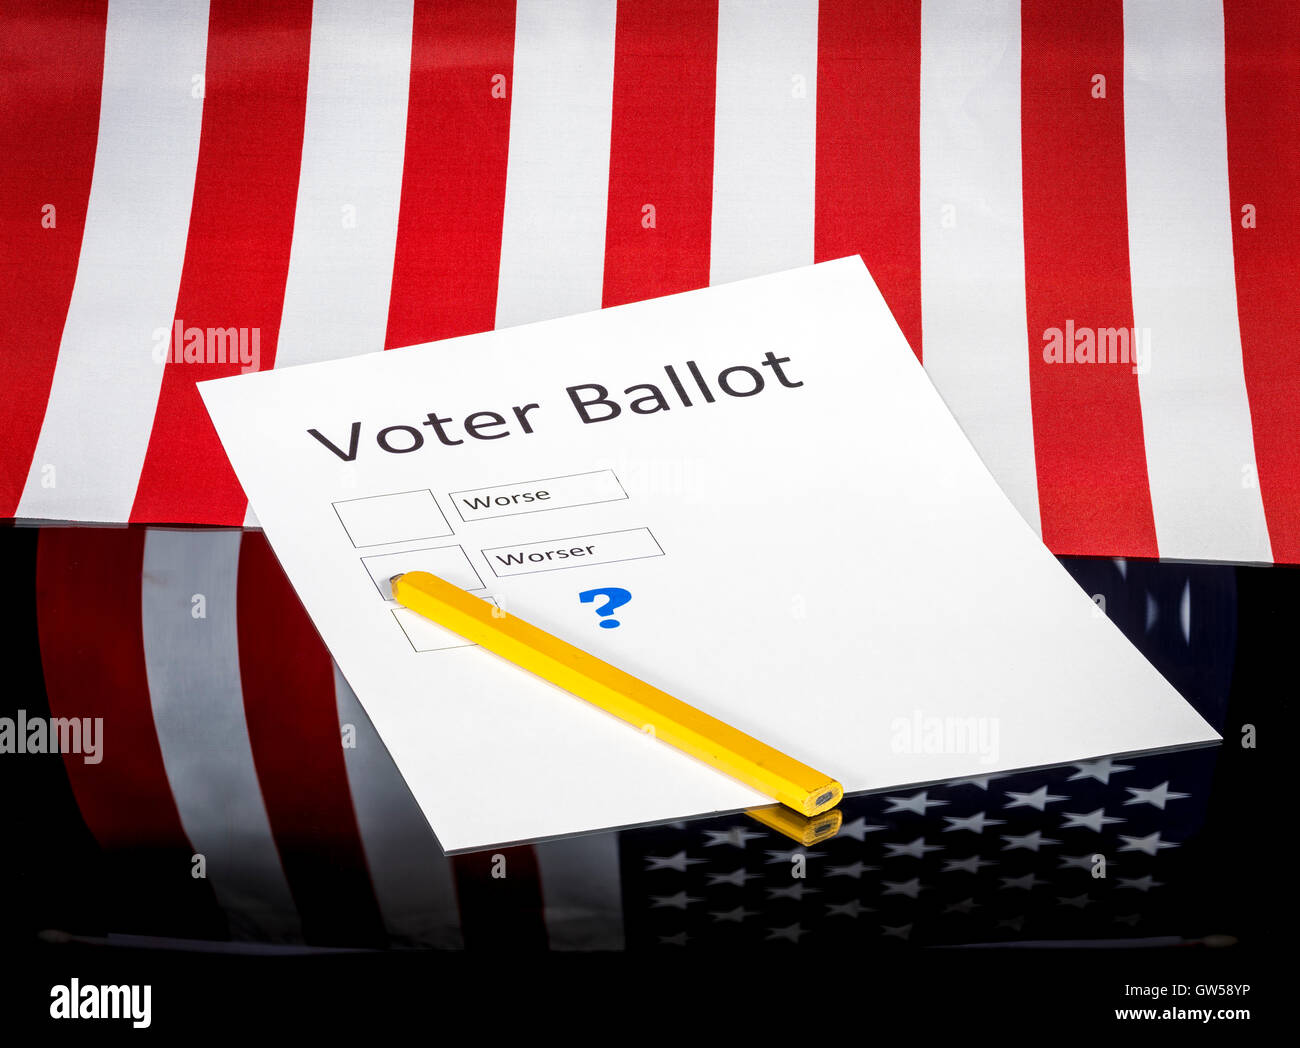 Voter ballot with desperate discouraging choices Stock Photo